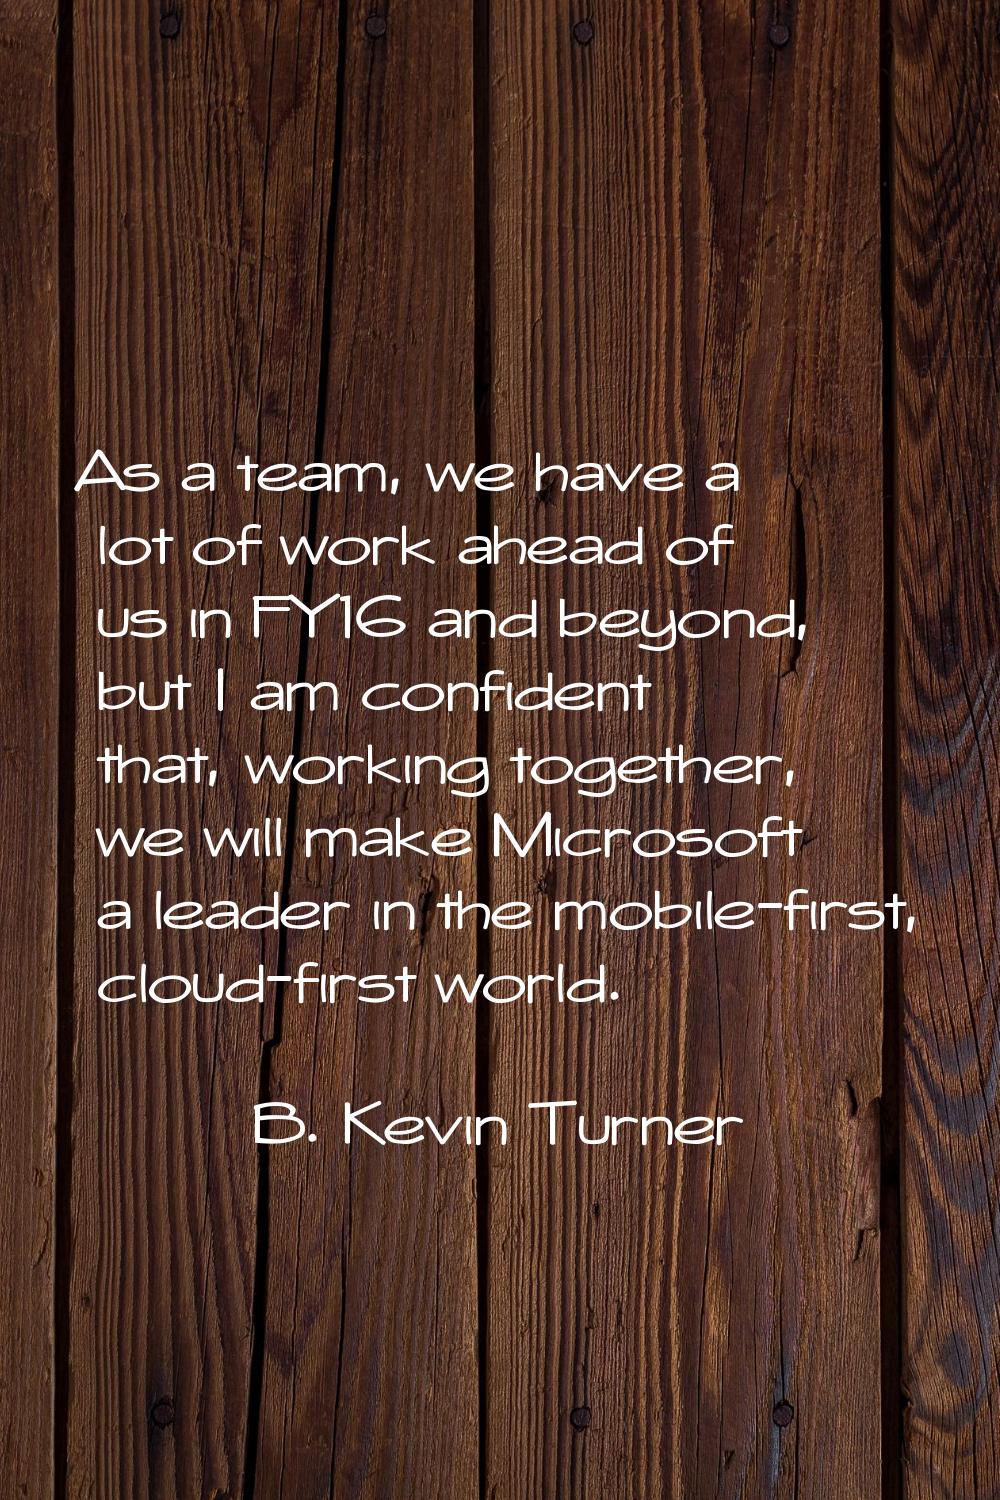 As a team, we have a lot of work ahead of us in FY16 and beyond, but I am confident that, working t